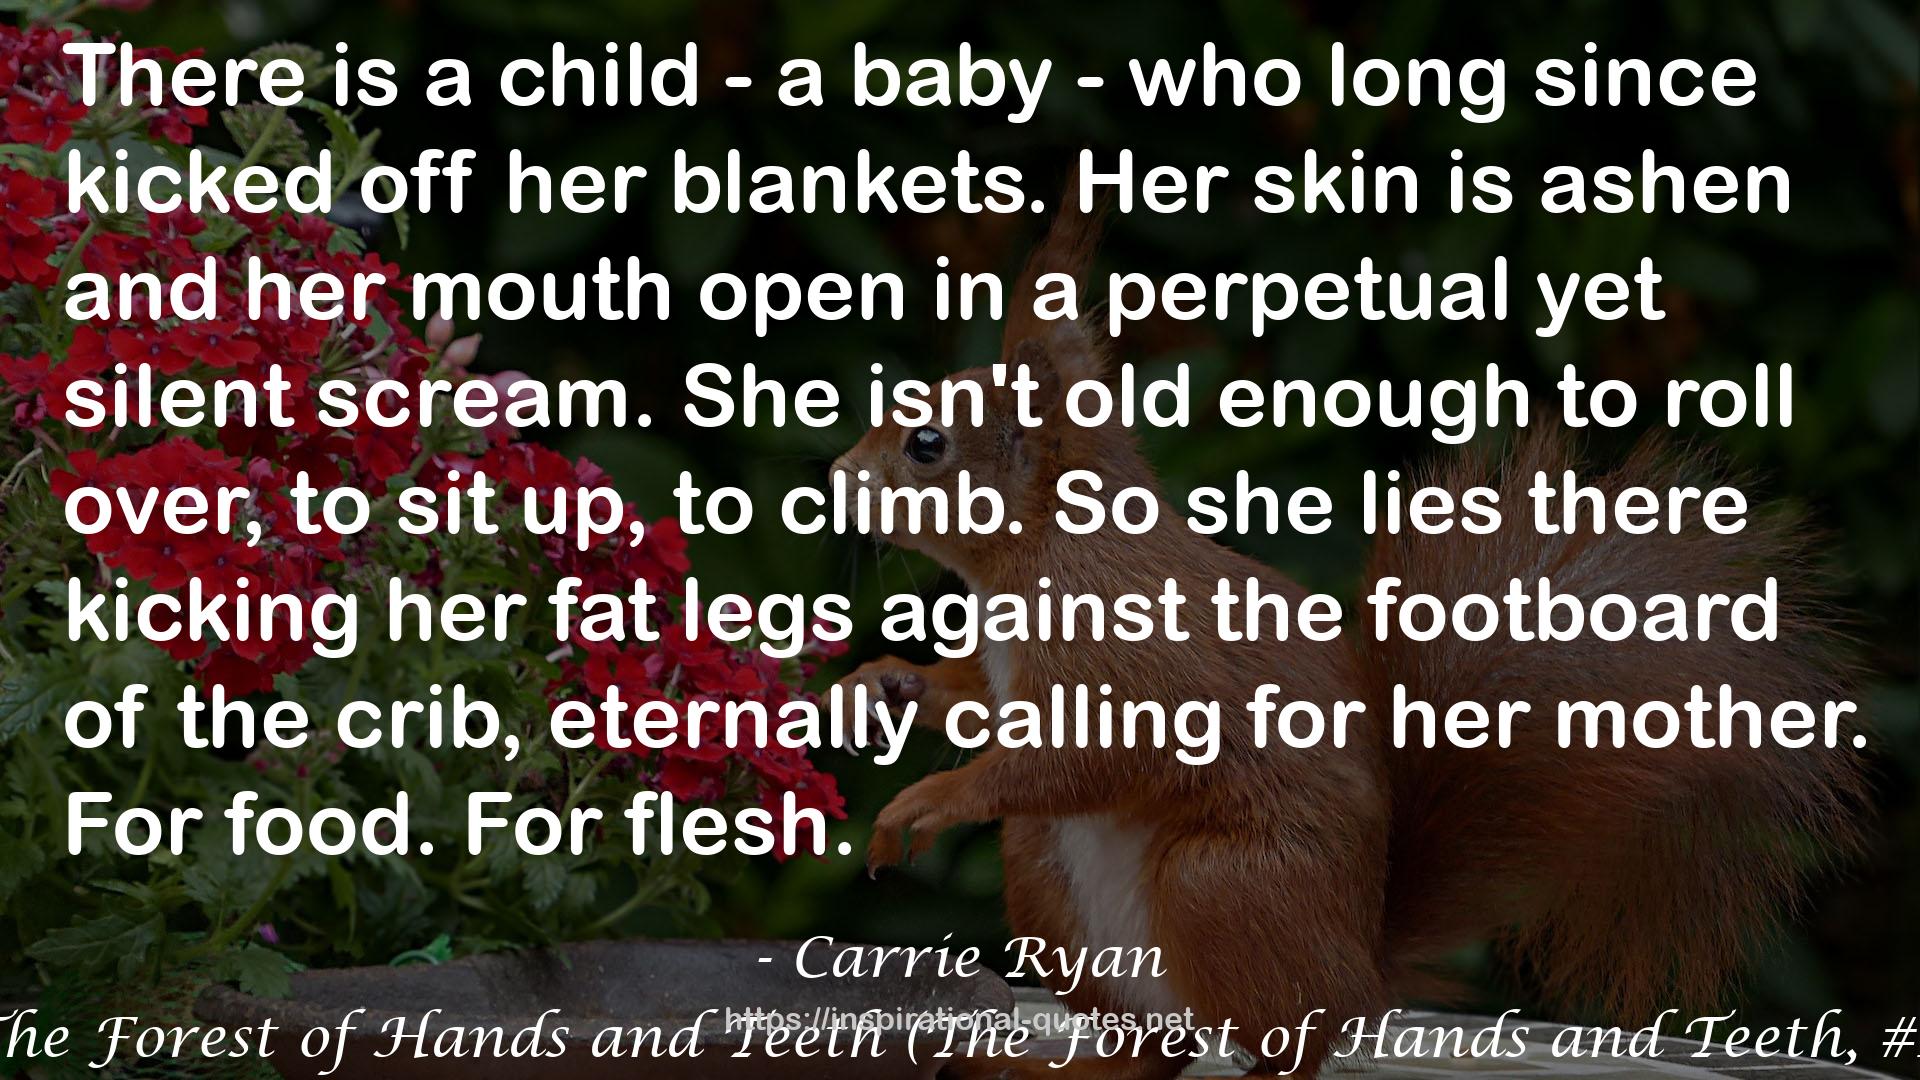 The Forest of Hands and Teeth (The Forest of Hands and Teeth, #1) QUOTES